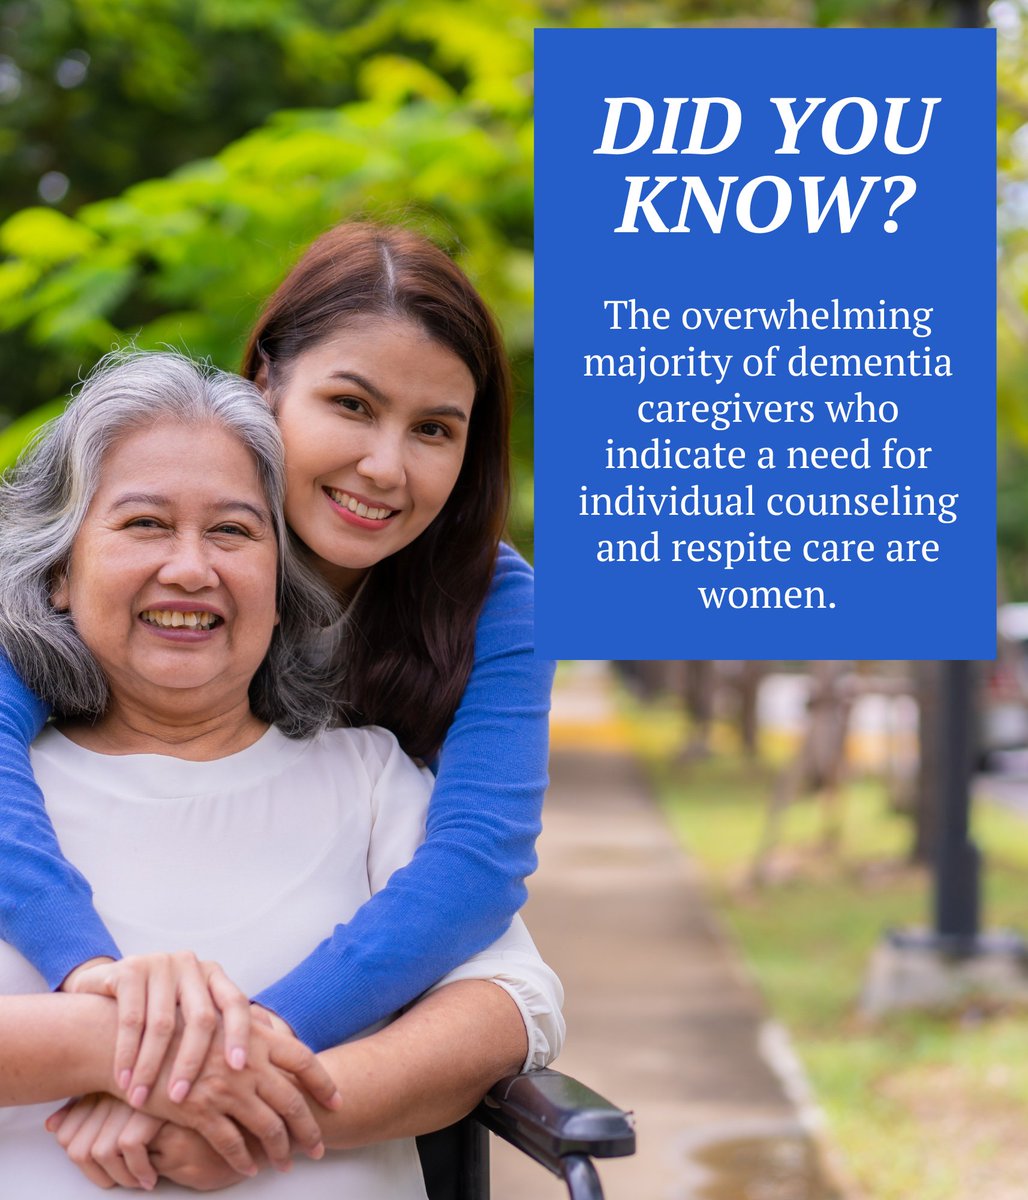 Women caregivers may experience higher levels of depression and impaired health than their male counterparts. If you are experiencing mental health issues related to caregiving, reach out to friends, family, and/or your primary care provider for help. #CaregiverBurden